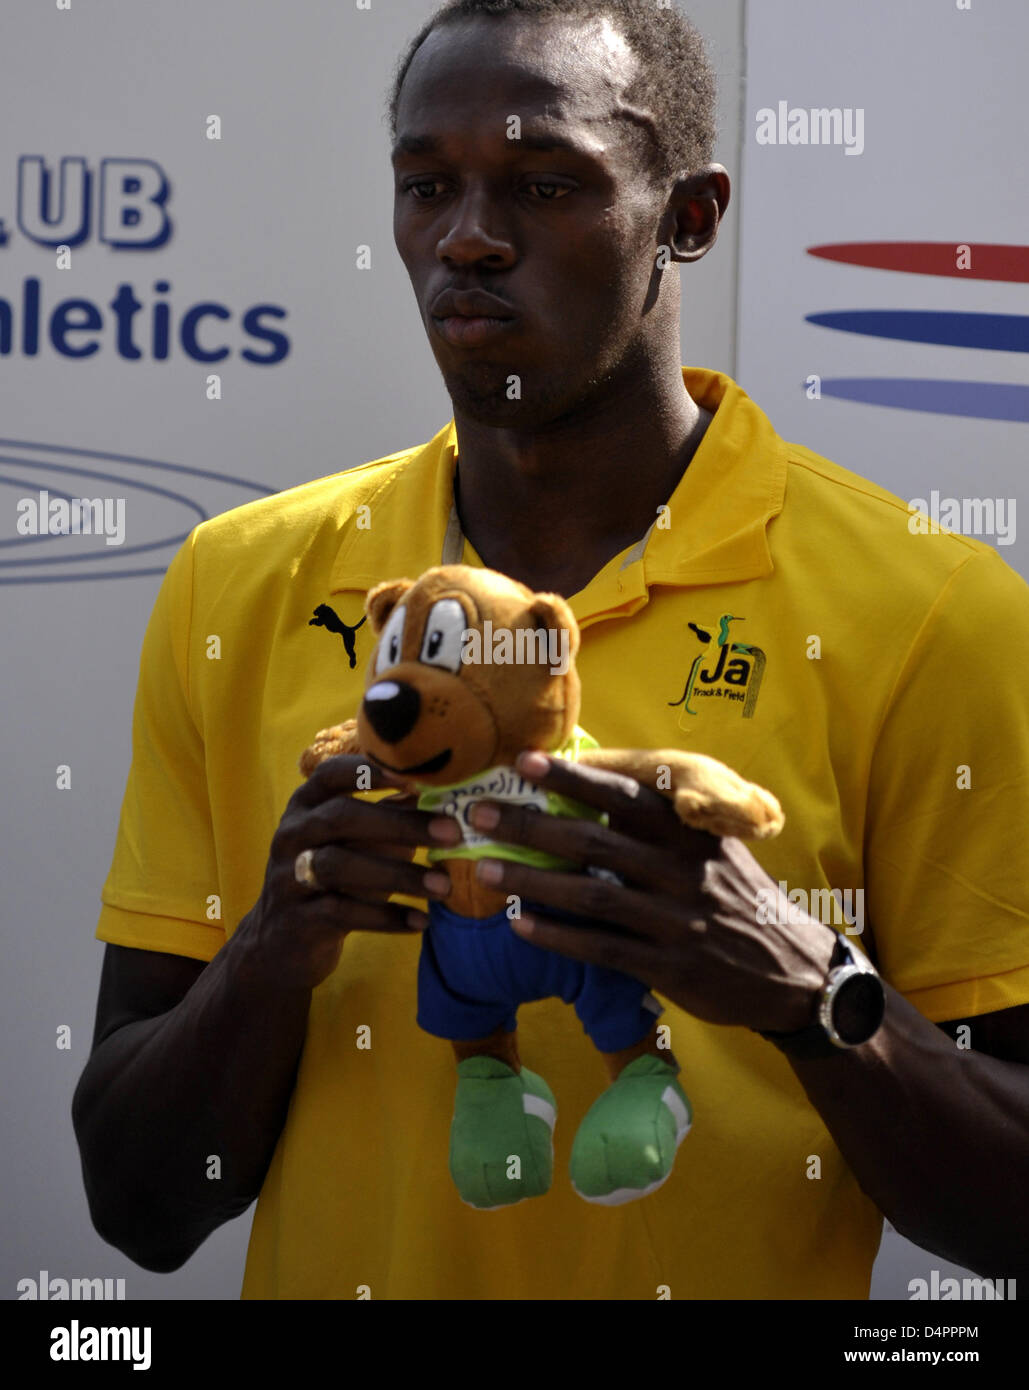 Jamaica?s sprinter Usain Bolt at the Champions Club during the 12th IAAF World Championships in Athletics Berlin 2009 in Berlin, Germany, 23 August 2009.  Photo: Hannibal Stock Photo